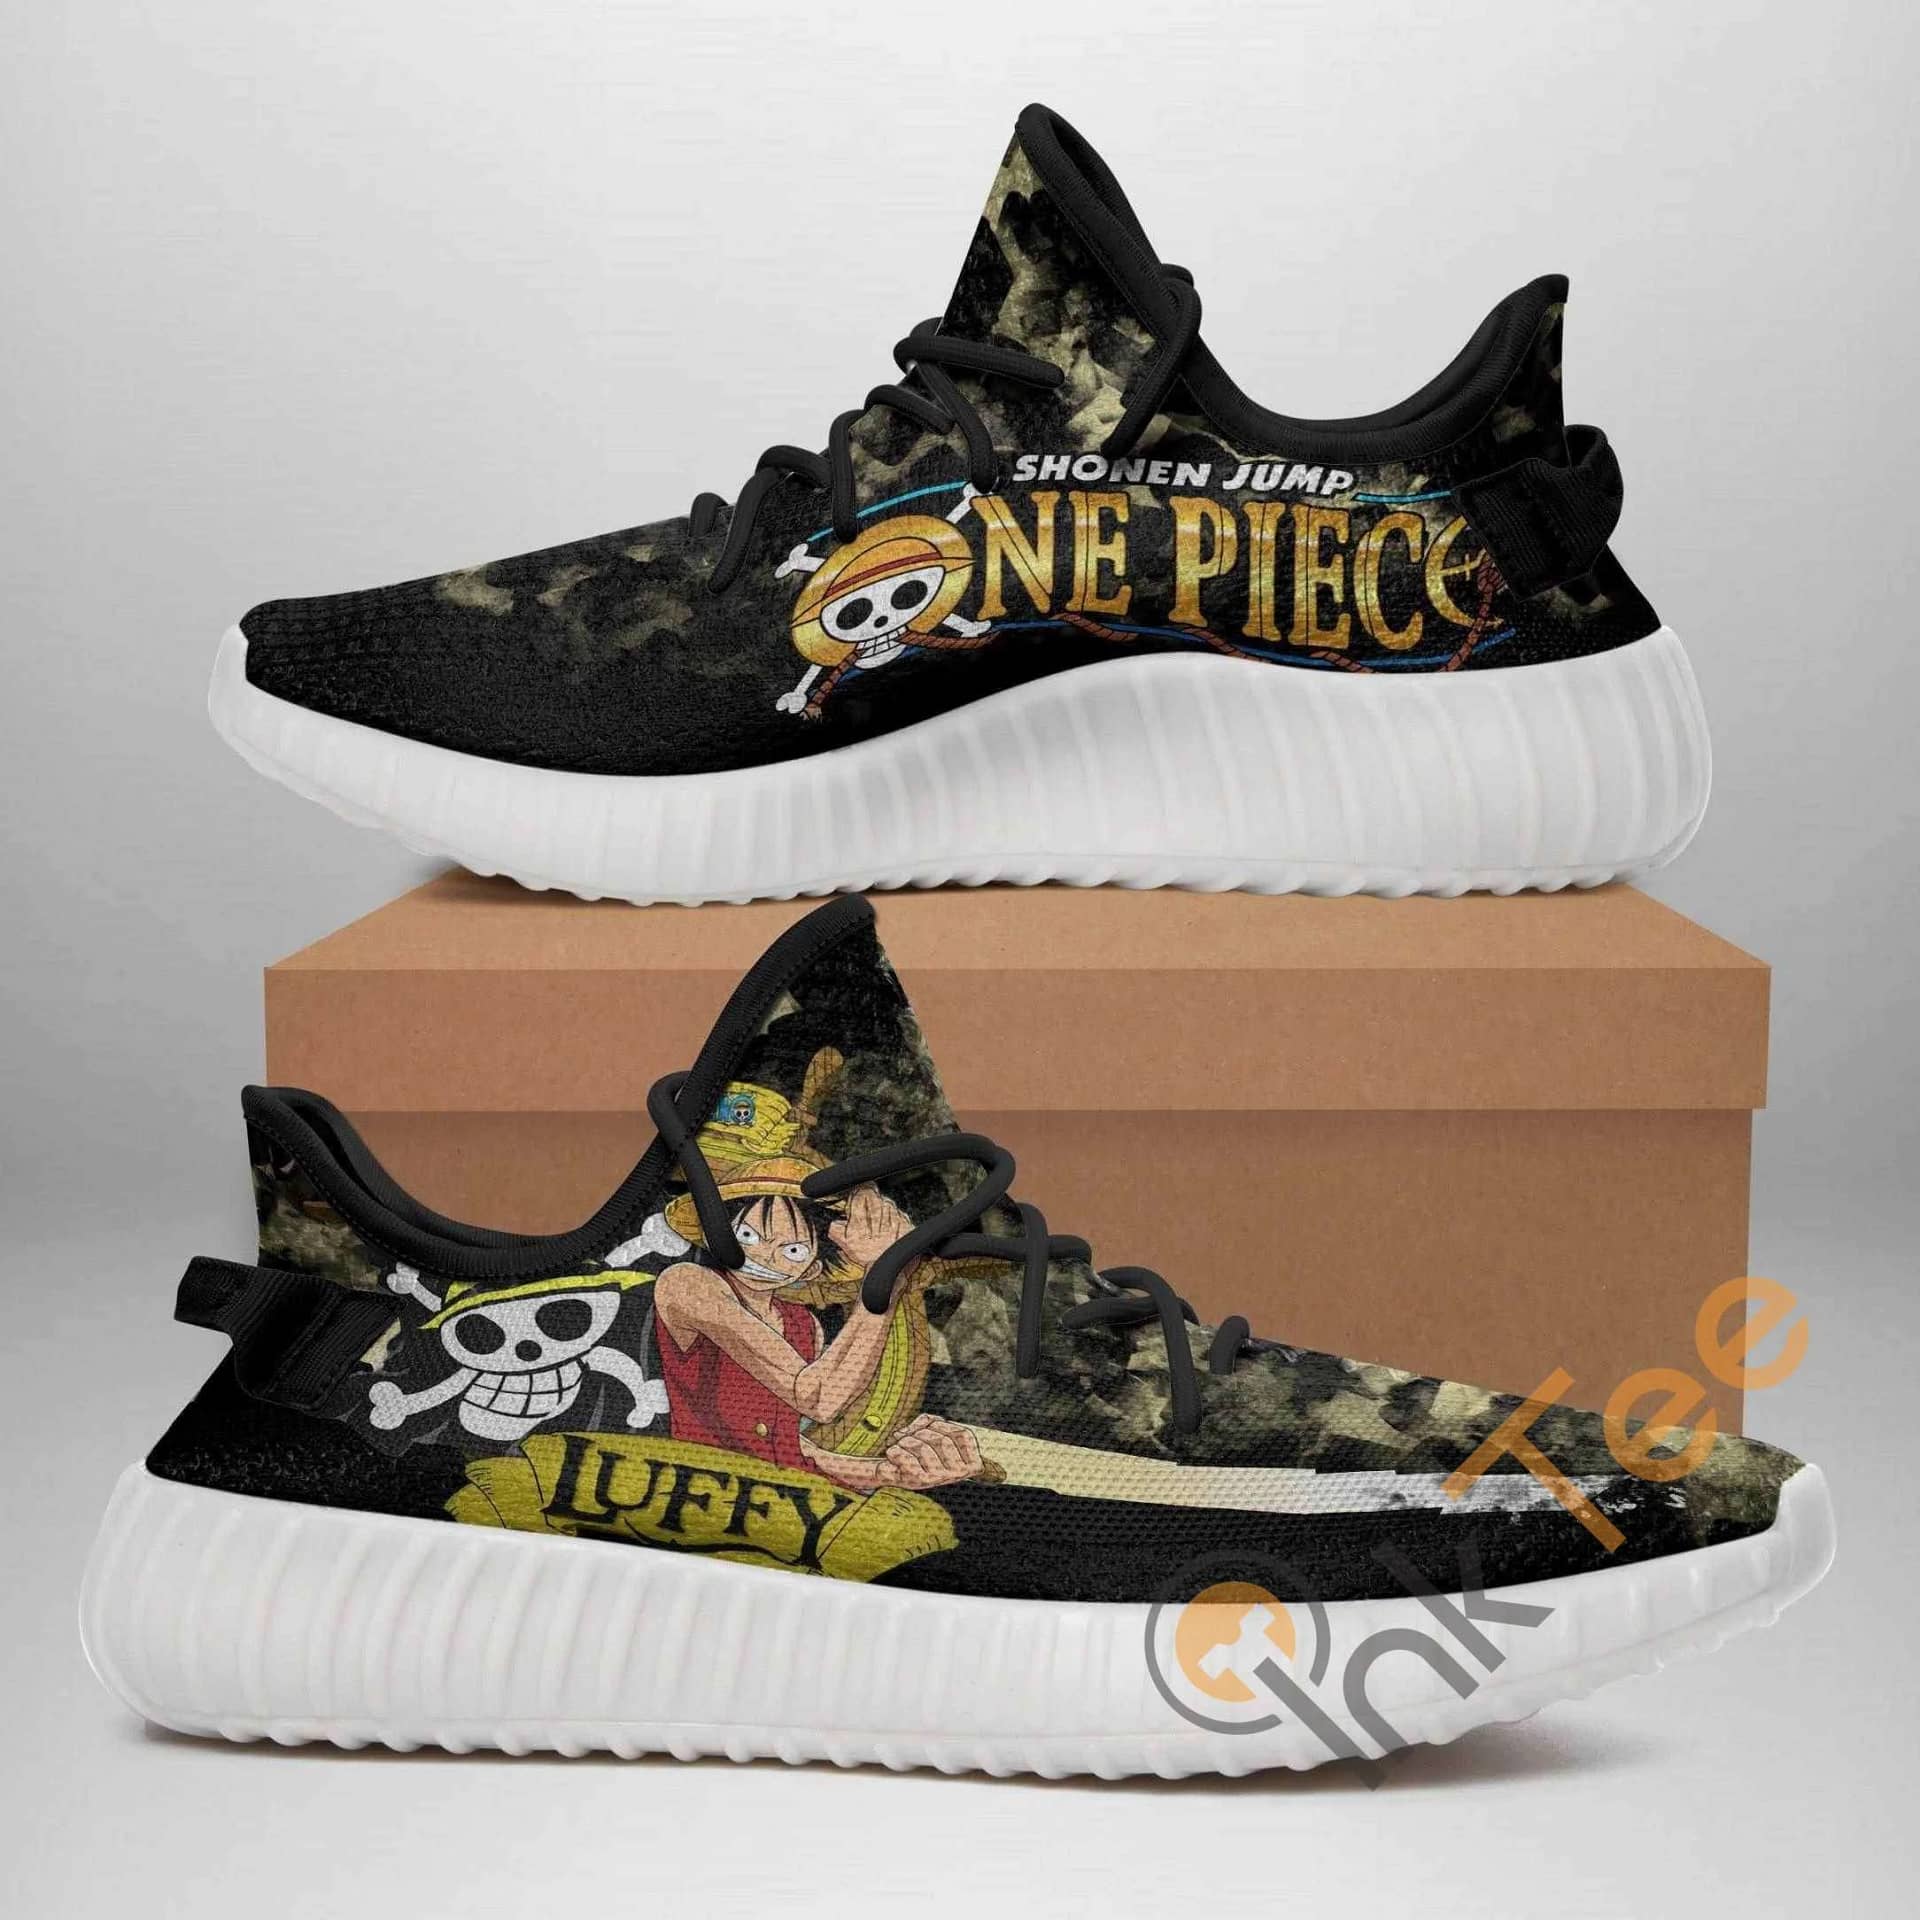 One Piece Luffy Amazon Best Selling Yeezy Boost